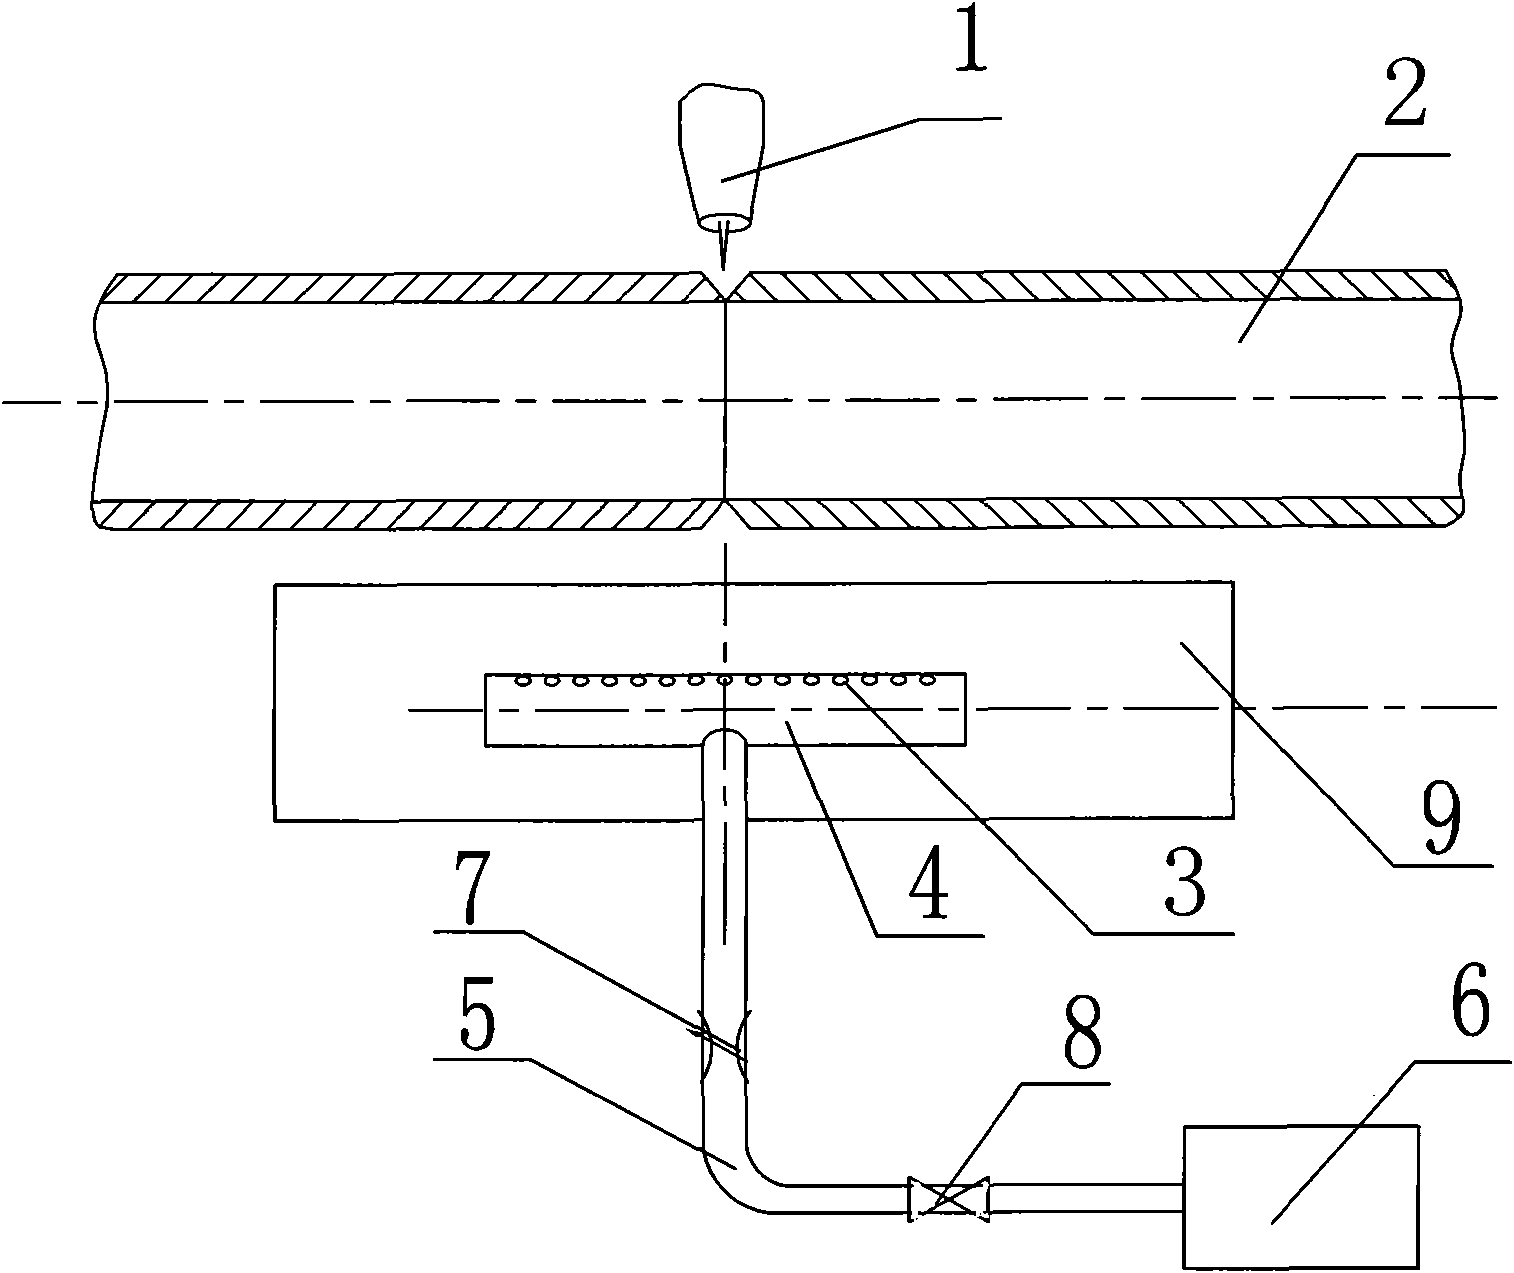 Device and method for water-cooling hot wire argon tungsten-arc welding of austenitic stainless steel tube